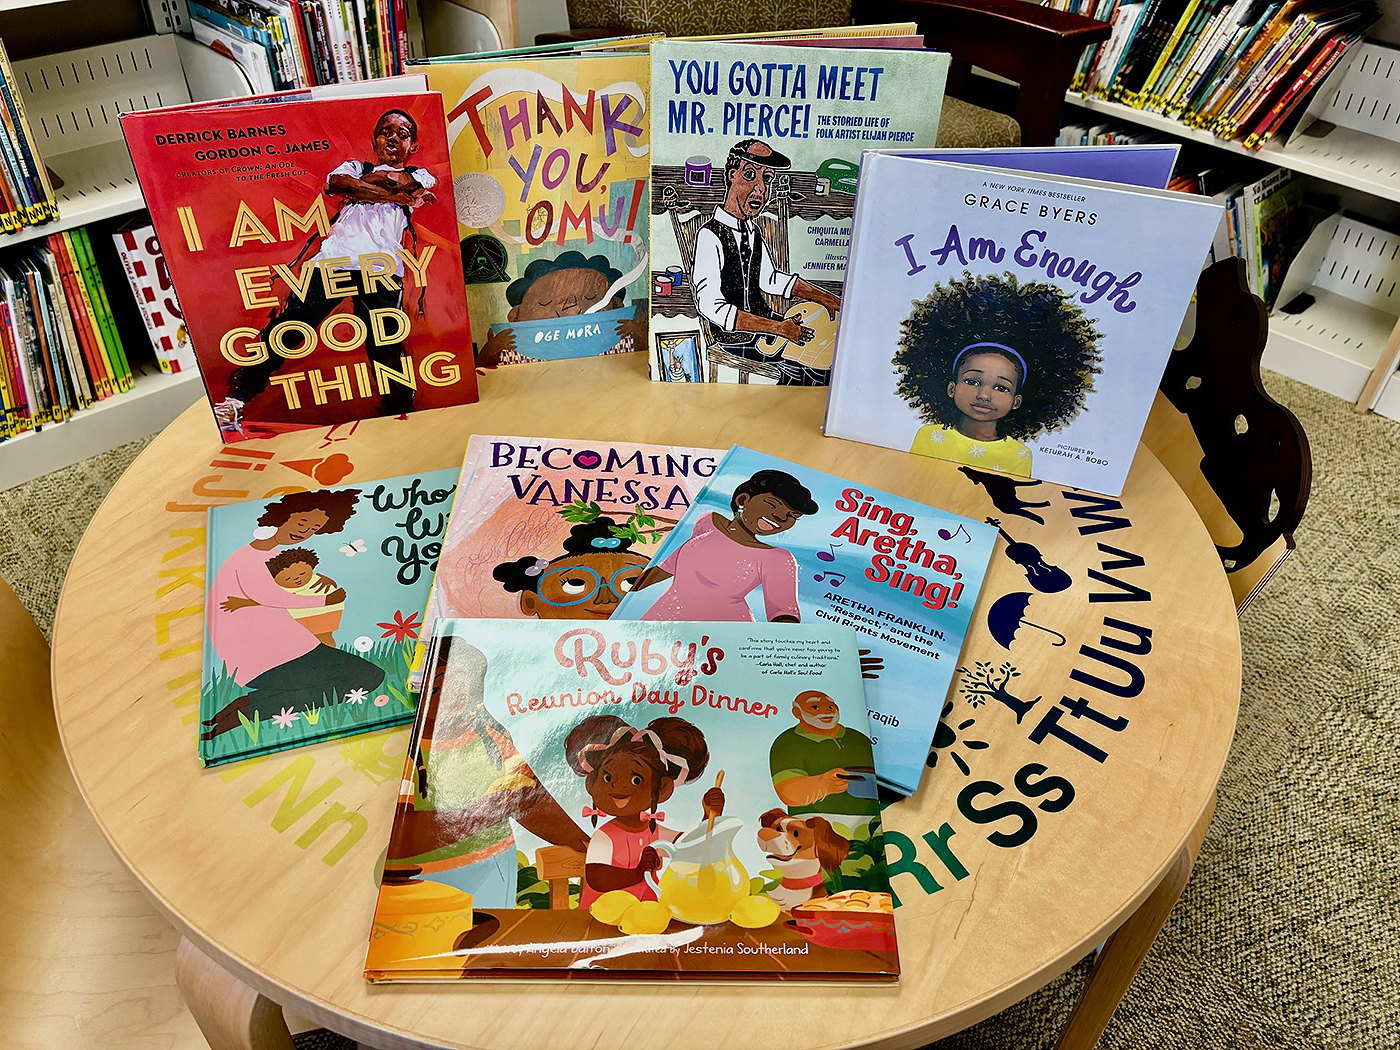 On top of a round table are eight children’s books chosen to commemorate Black History Month. Among the book titles are “Sing, Aretha, Sing,” “Ruby’s Reunion Day Dinner,” and “You Gotta Meet Mr. Pierce!”